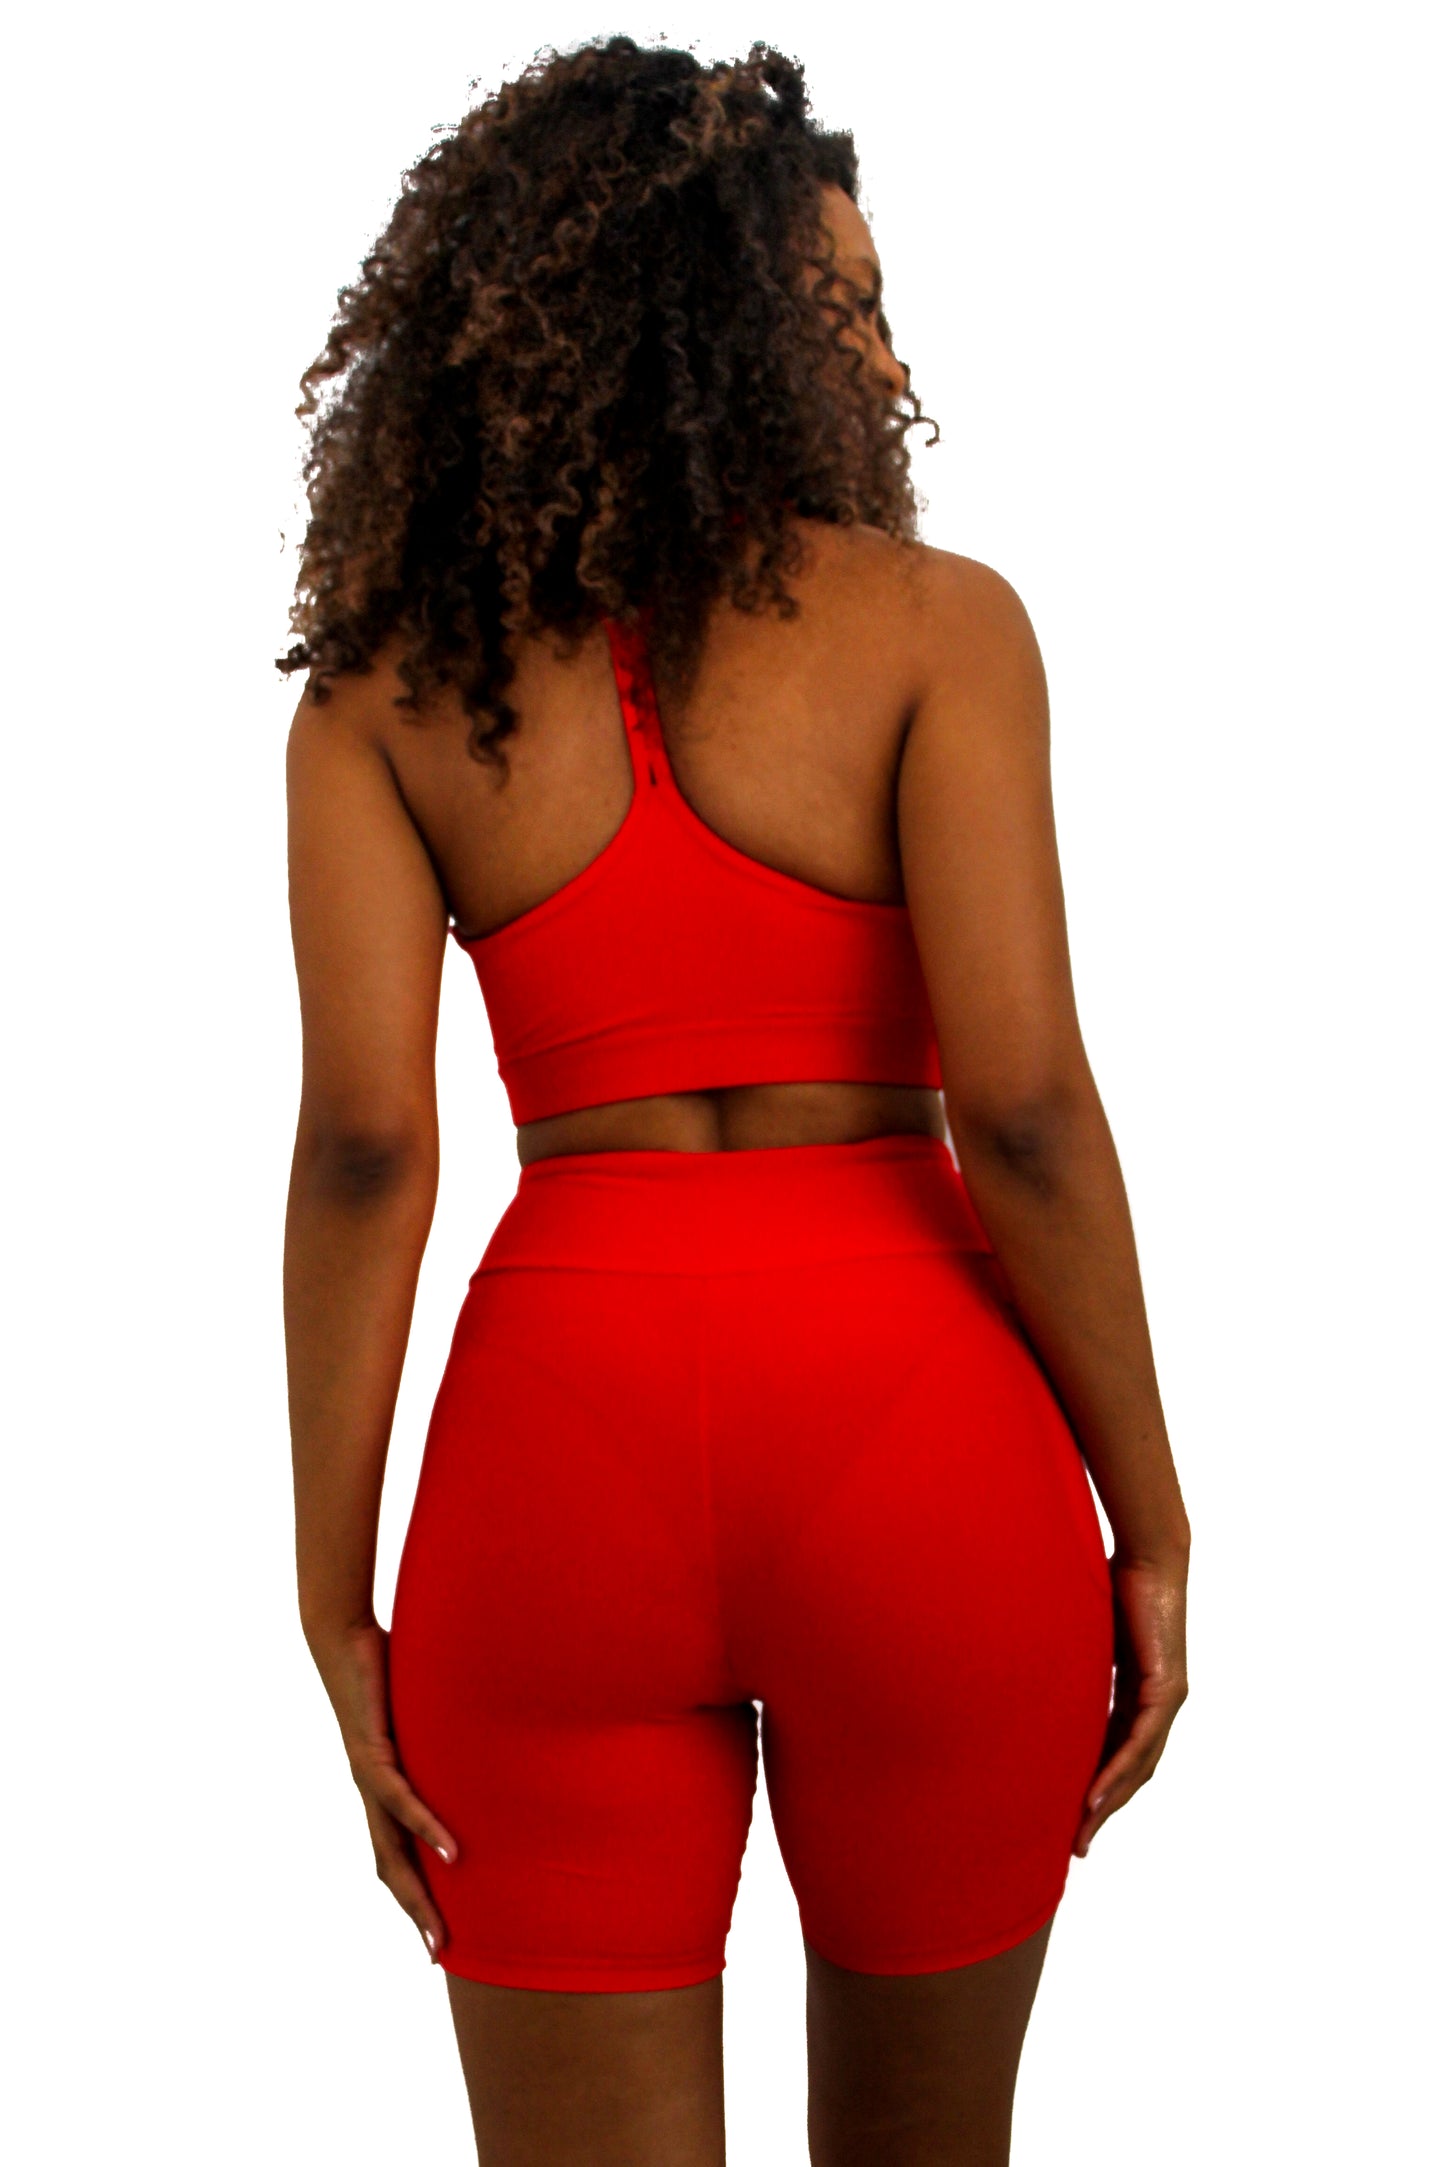 Red Classic Shorts 6' long high waist - Eco Free